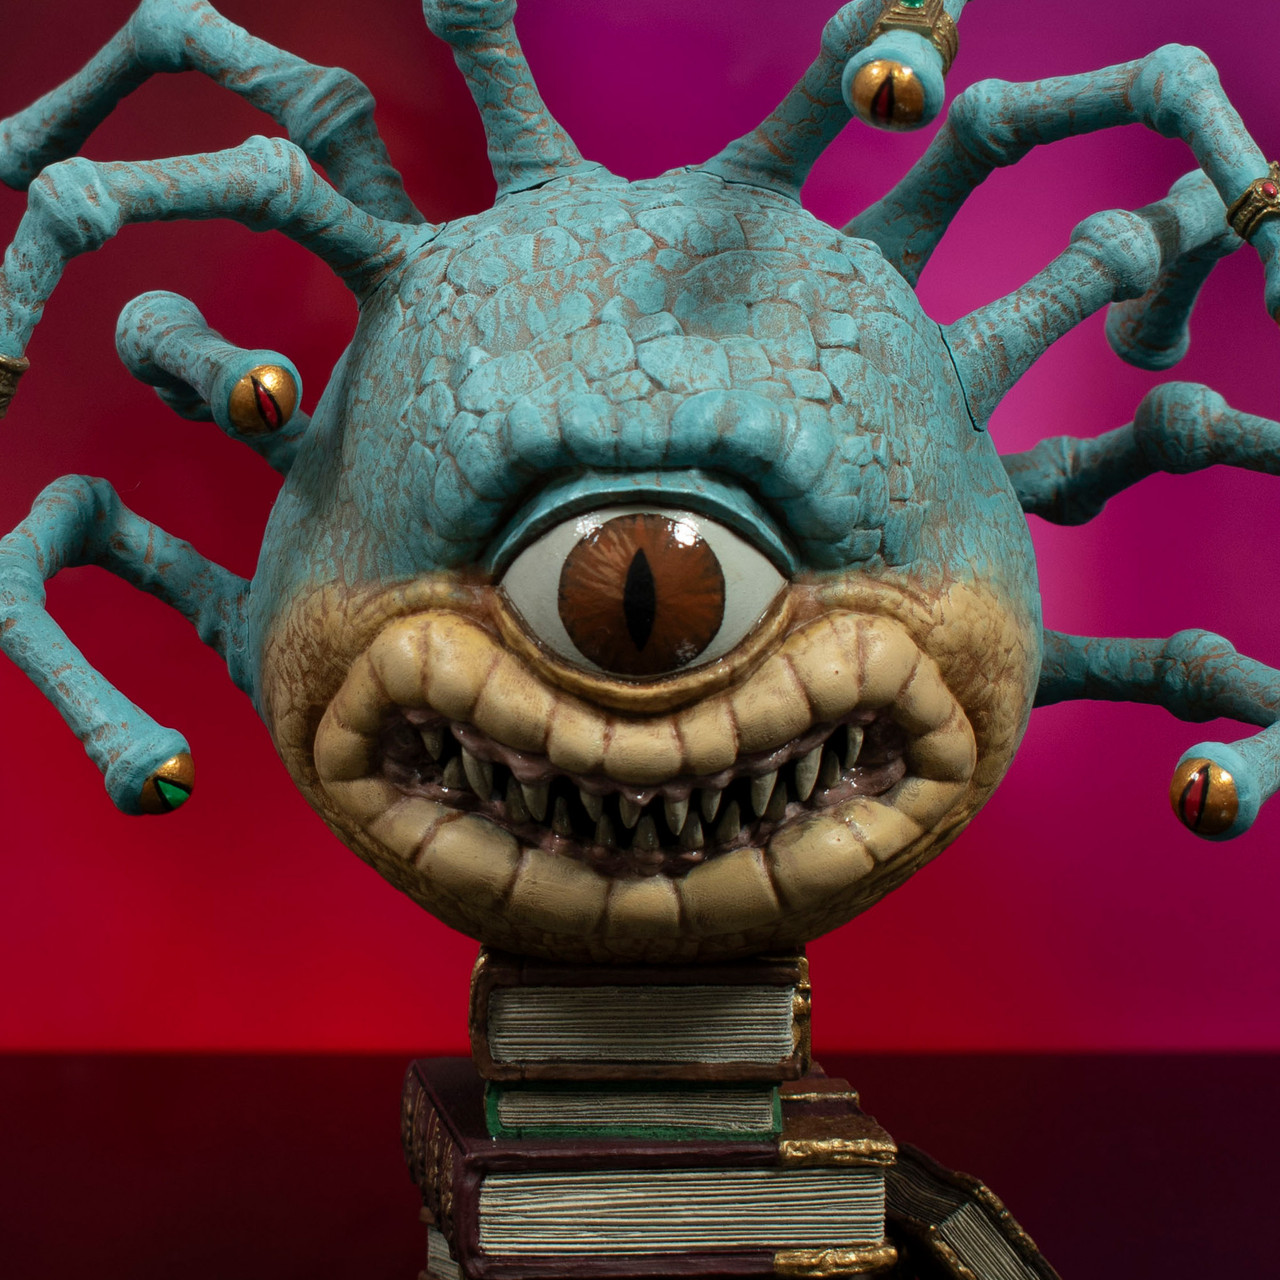 Pre-Order Diamond Gallery Dungeons & Dragons Xanathar Deluxe Statue